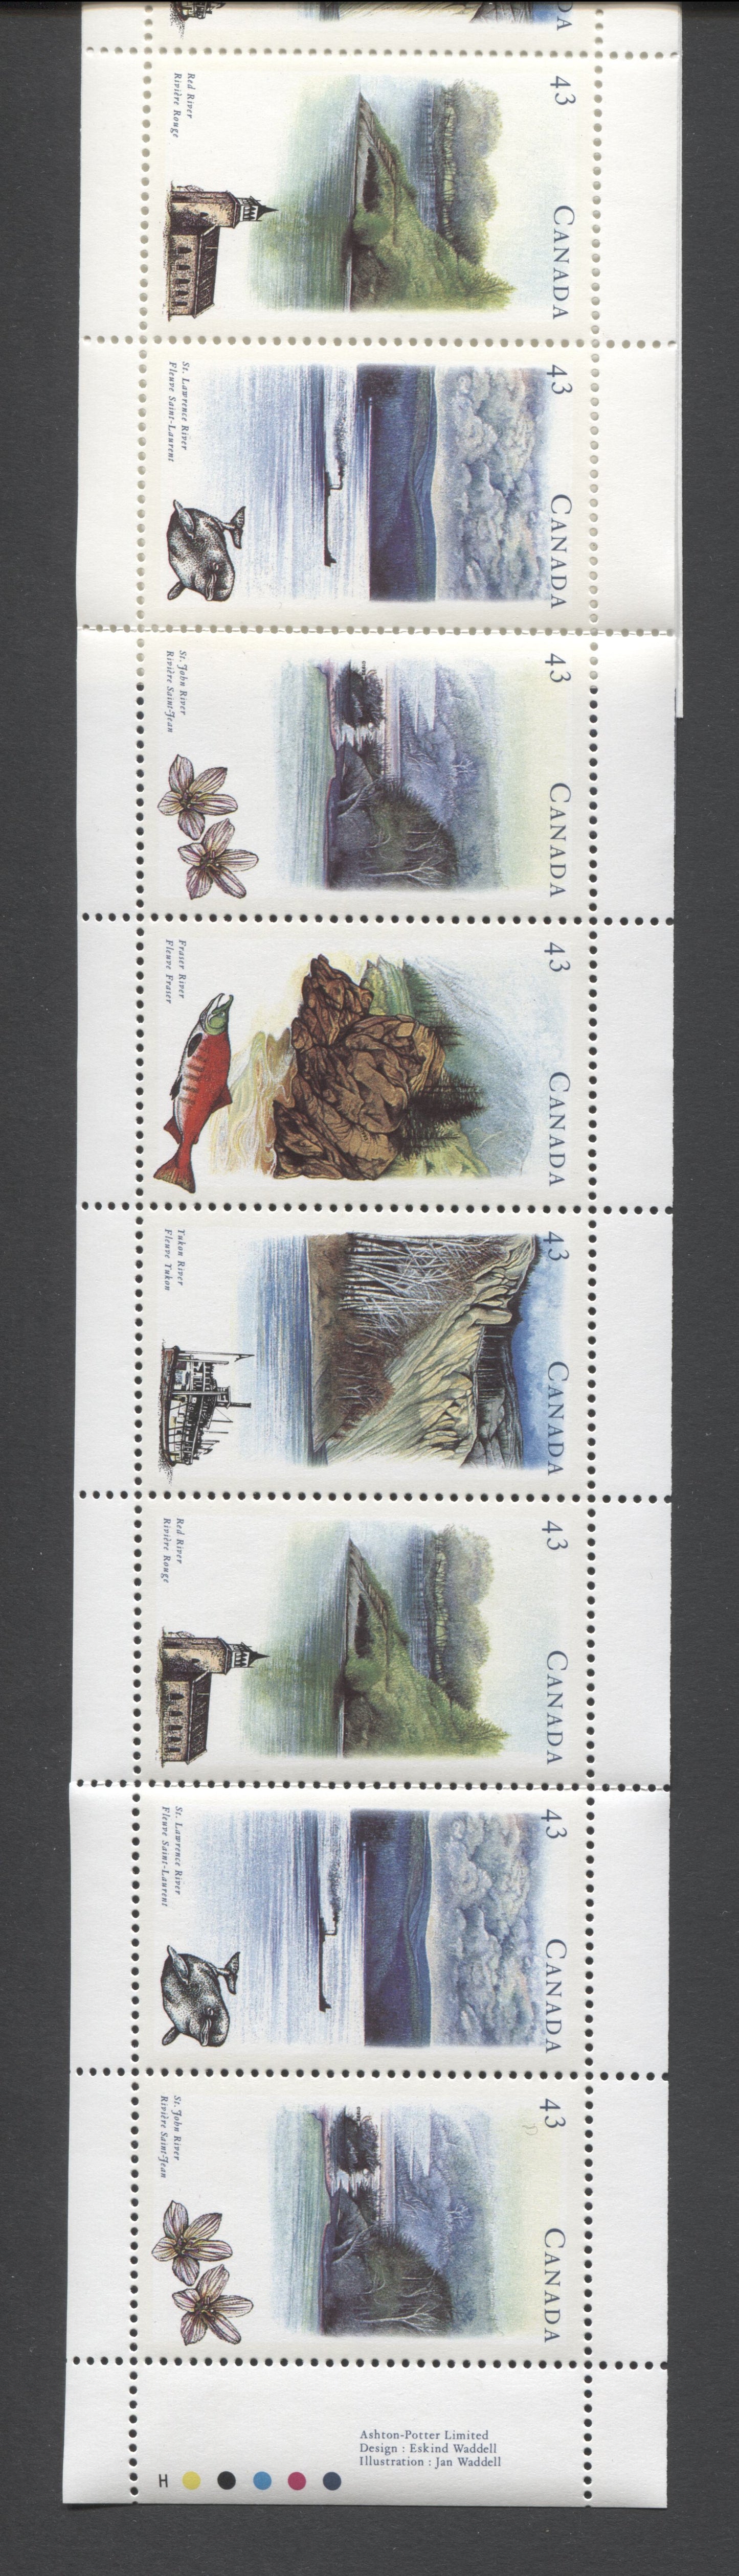 Canada #BK161a-b 1993 Heritage Rivers Issue, Complete $4.30  Booklet, Harrison Paper, Dead Paper, 4 mm GT-4 Tagging